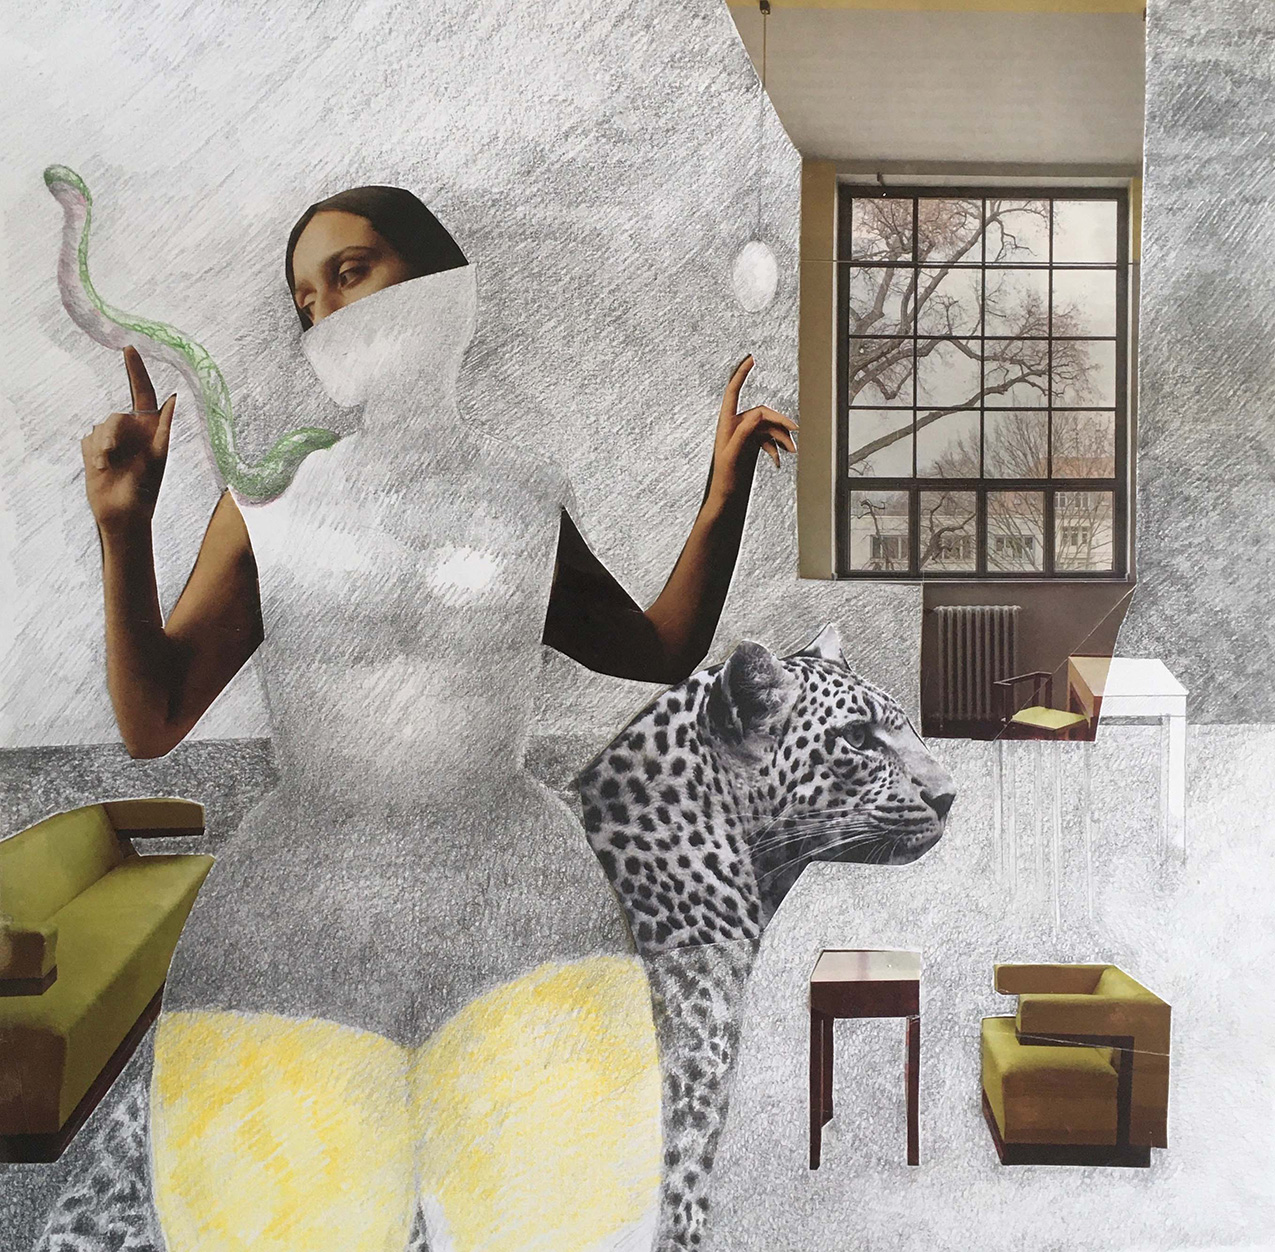 collage featuring found paper imagery and pencil sketches. features a woman with a snake on her shoulder, a leopard, a window with a barren landscape, and interior furniture.